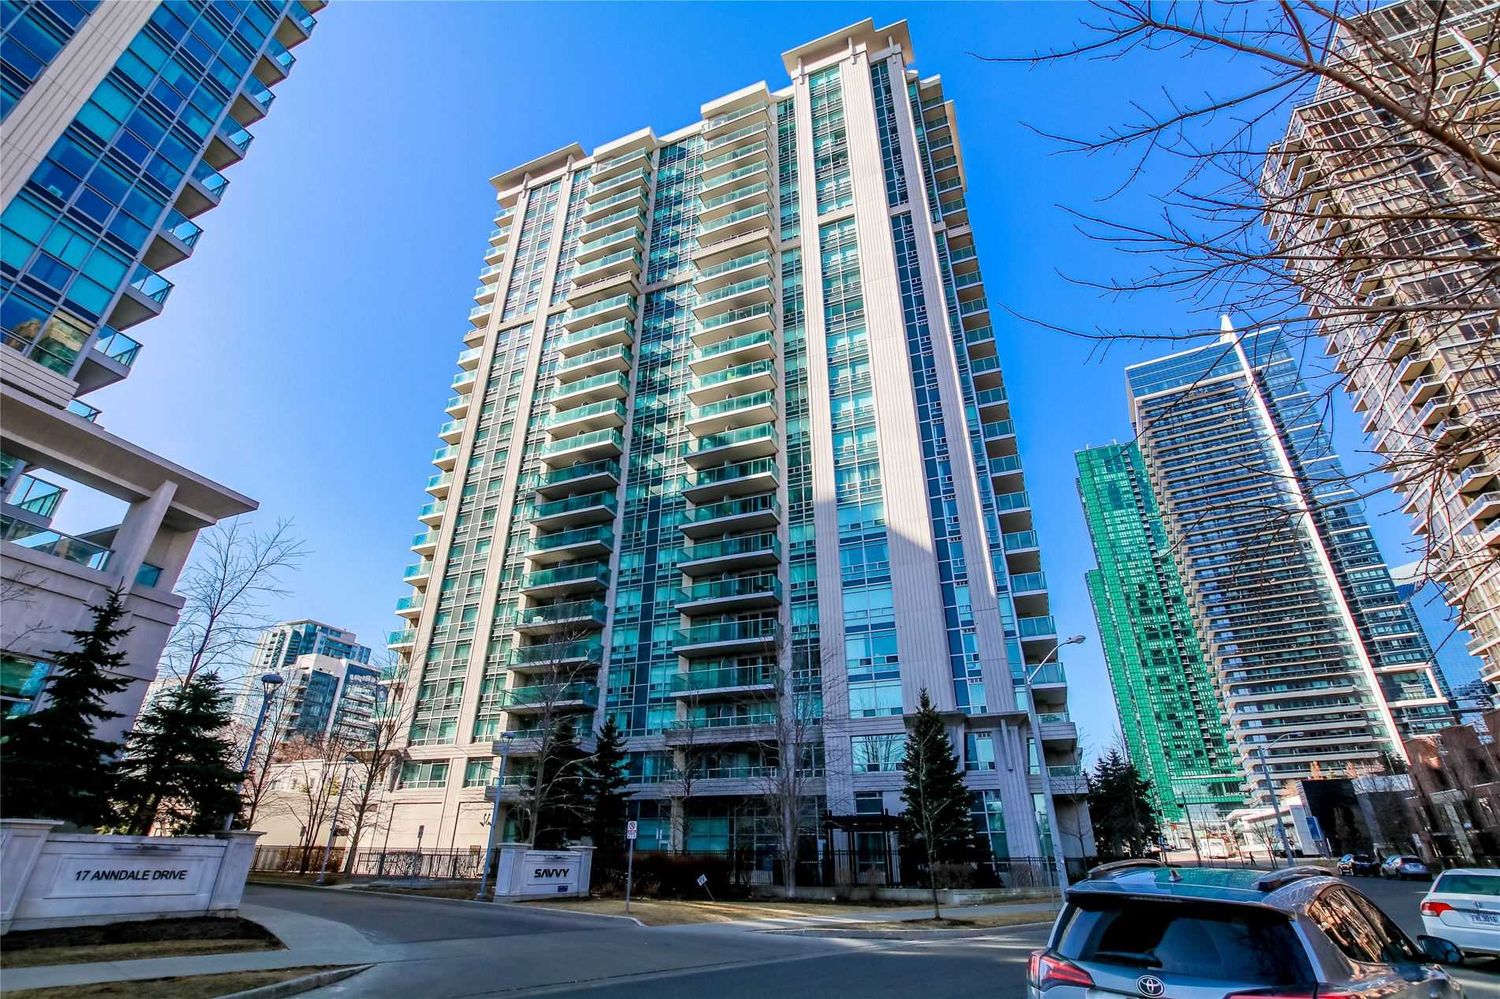 35 Bales Avenue. Cosmo Residences is located in  North York, Toronto - image #1 of 3